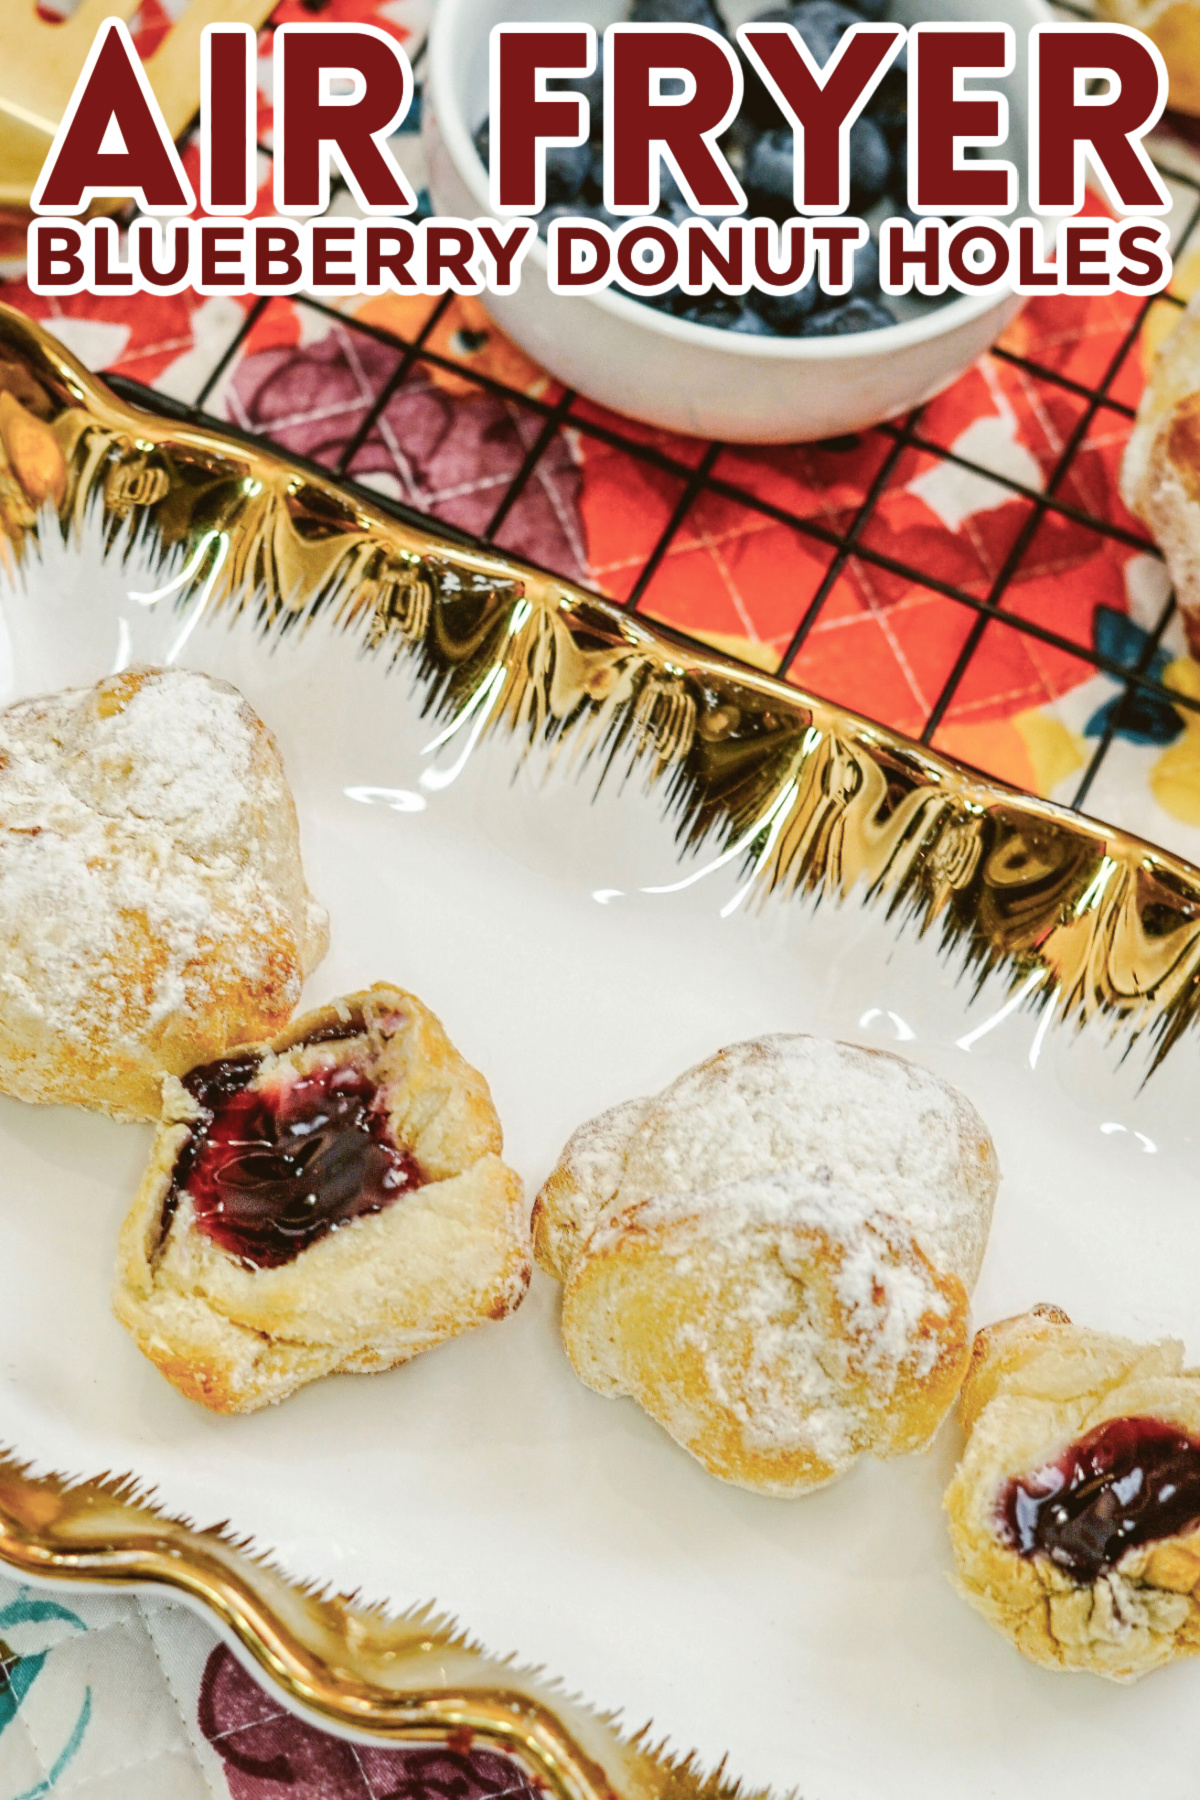 No need to wait in line for your favorite donut holes anymore! Make these delicious air fryer blueberry donut holes at home in minutes.